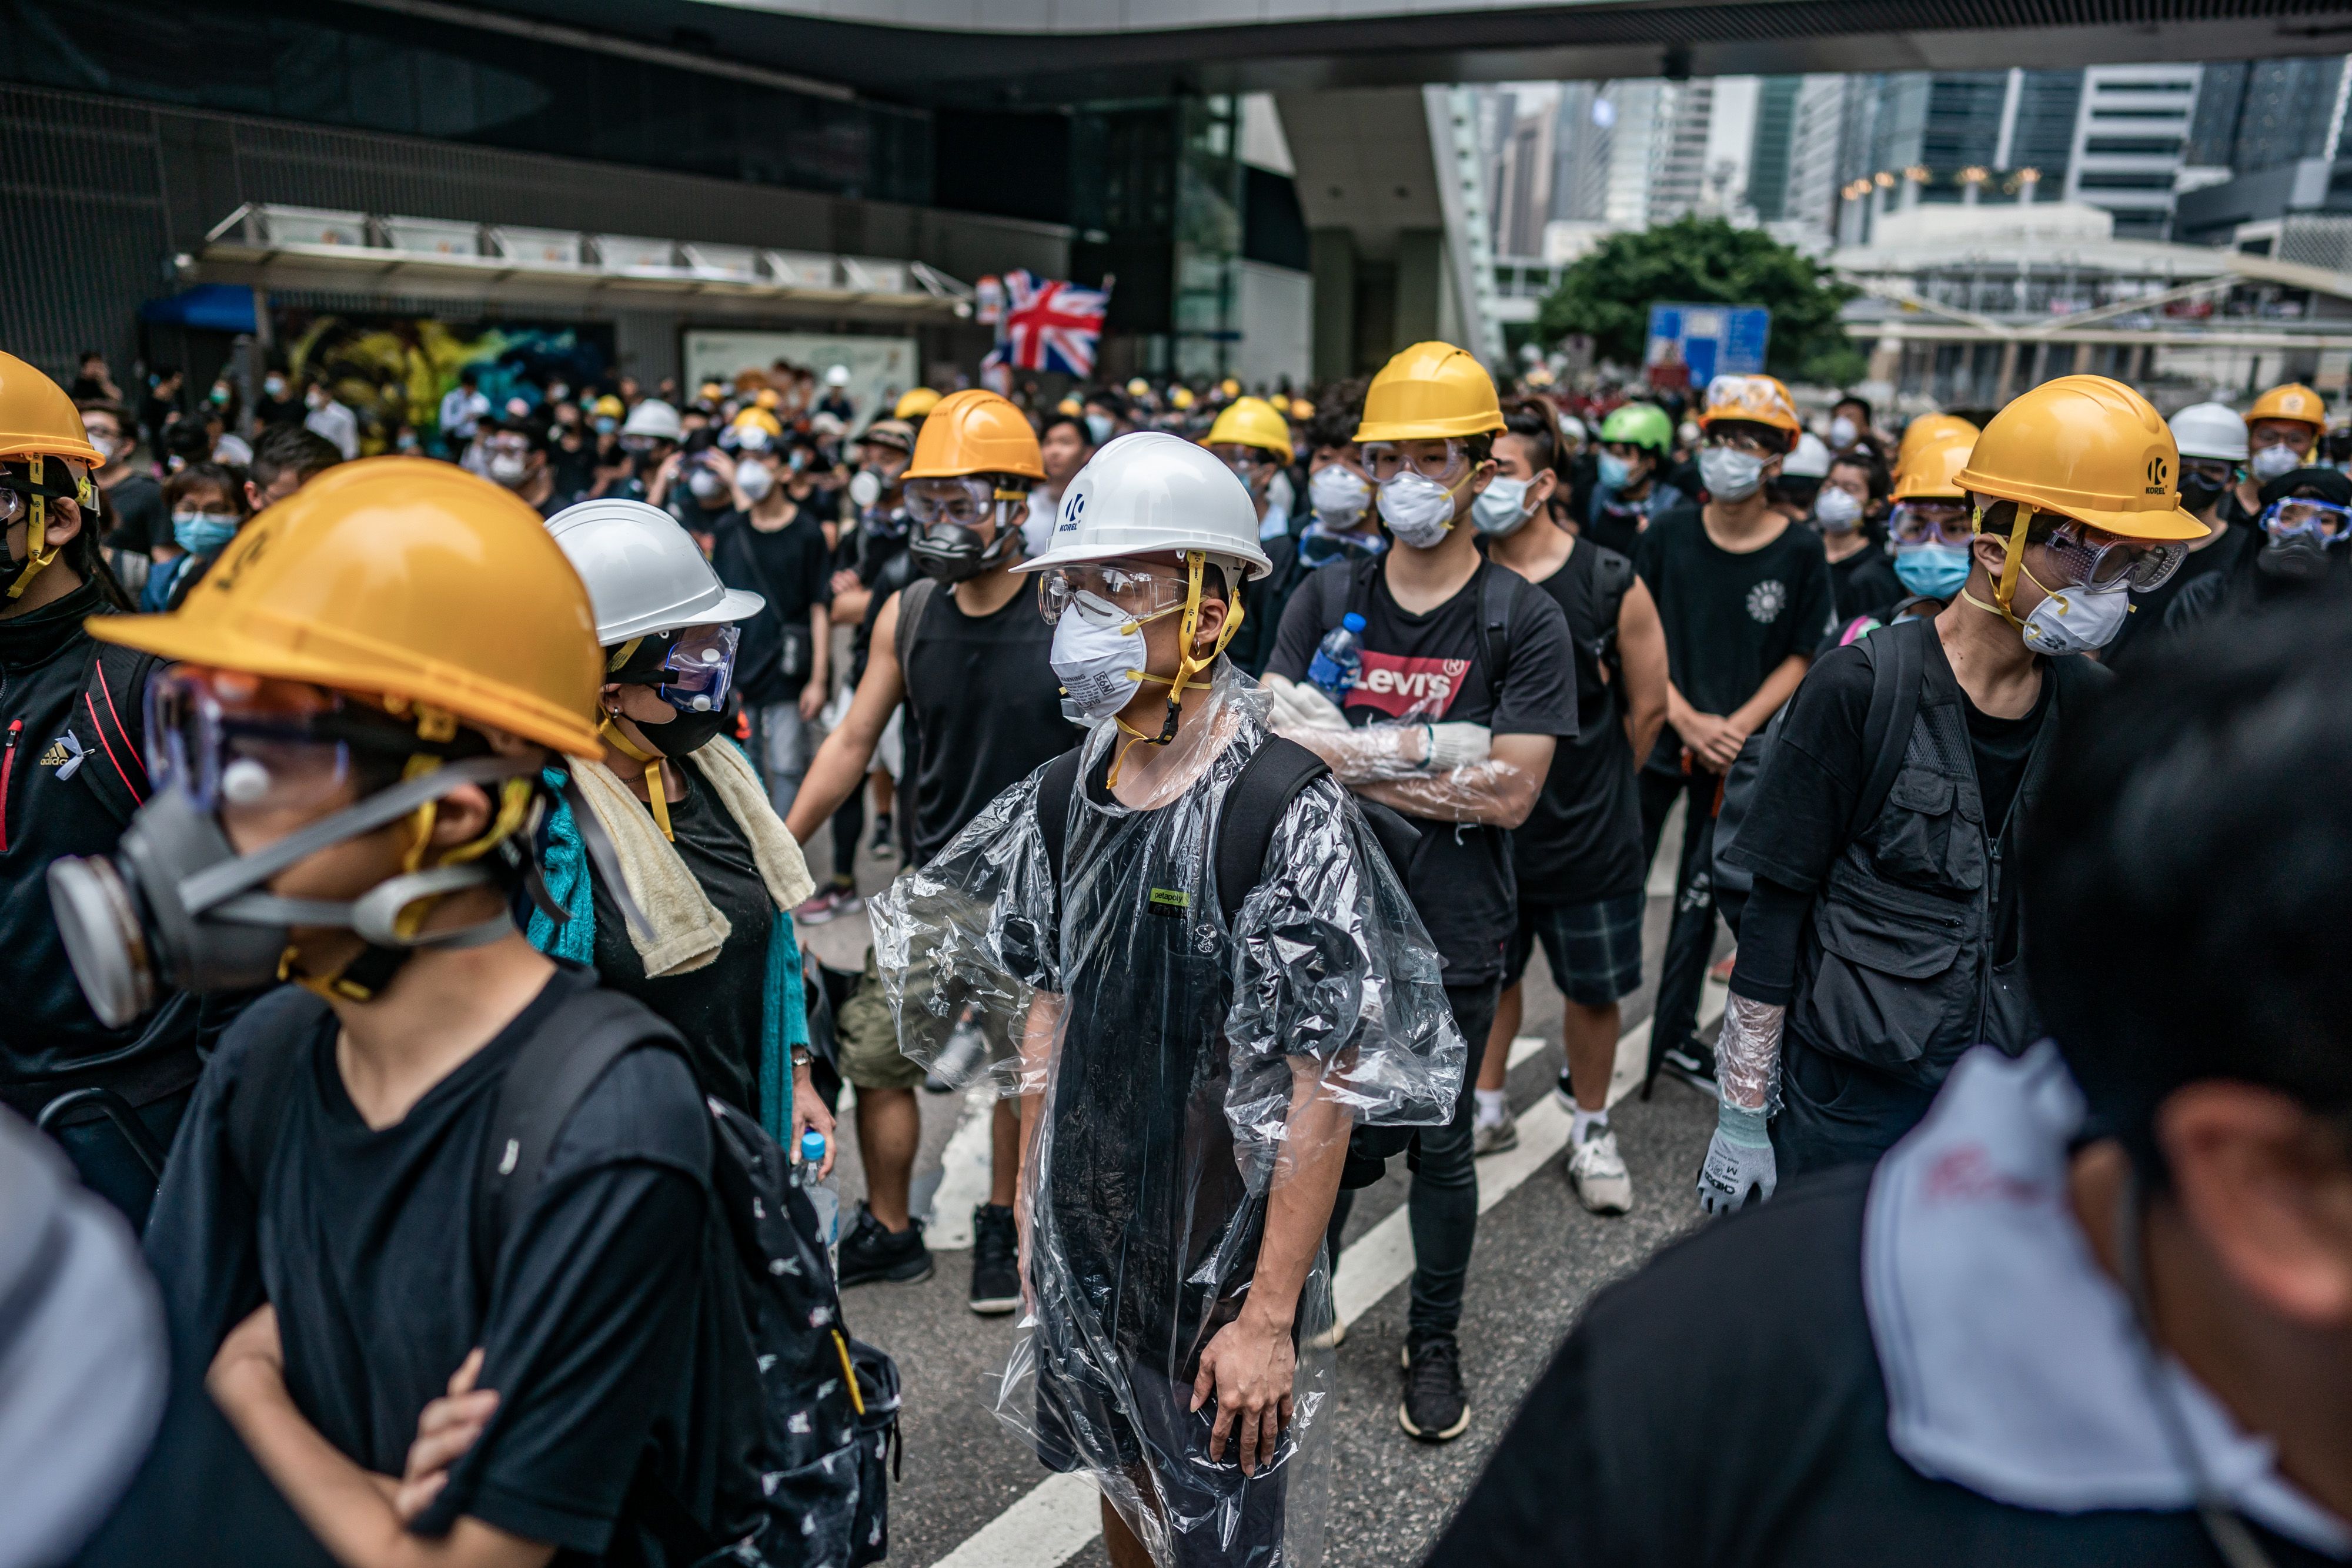 Protesters stand off with police as police officers attempt to clear the road after a demonstration against the now-suspended extradition bill on June 17, 2019 in Hong Kong China.